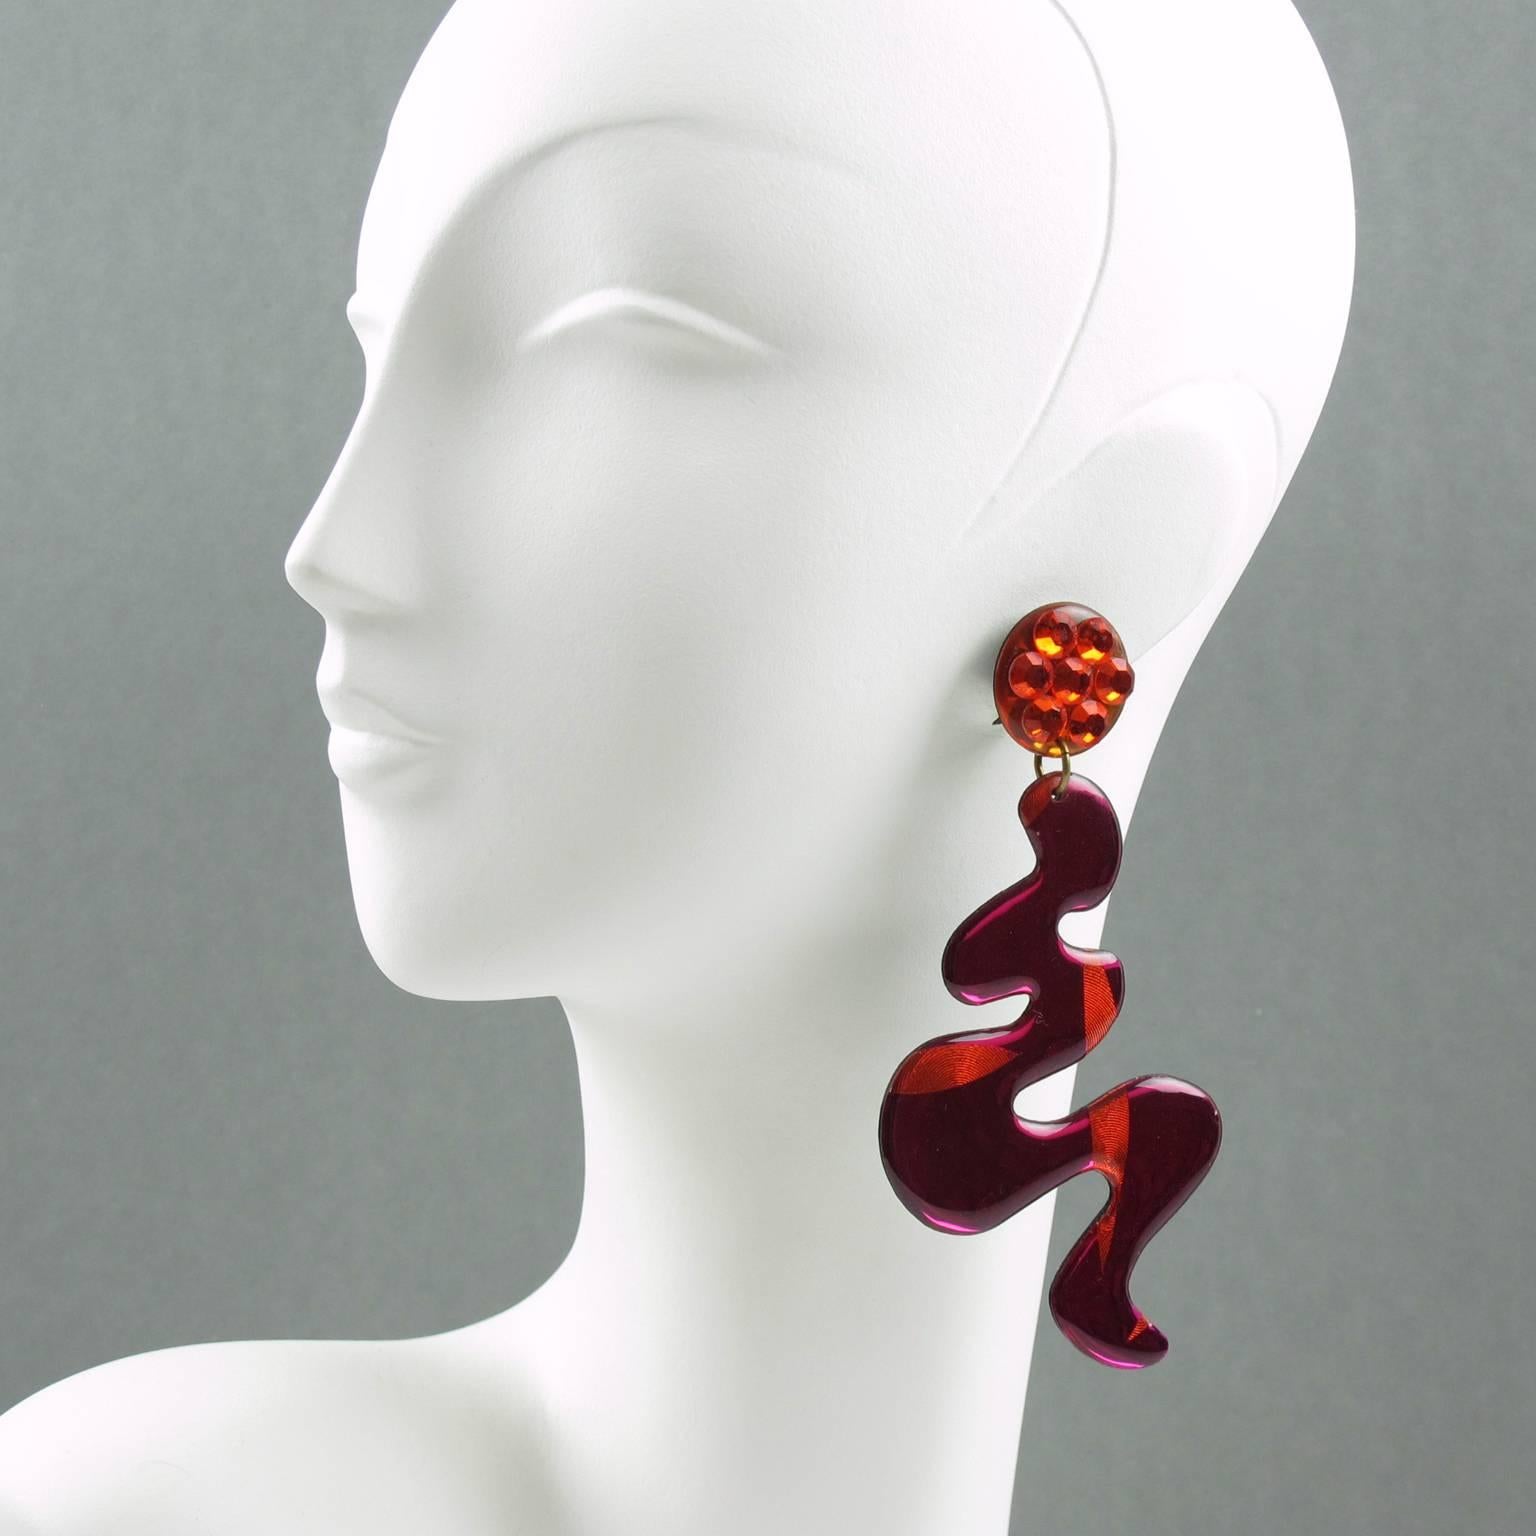 Impressive Italian Lucite or Resin dangling clip on earrings. Oversized chandelier shape with free-form design in hot pink and orange colors with texture pattern and black background. Clip fittings all paved with neon orange rhinestones.
Excellent